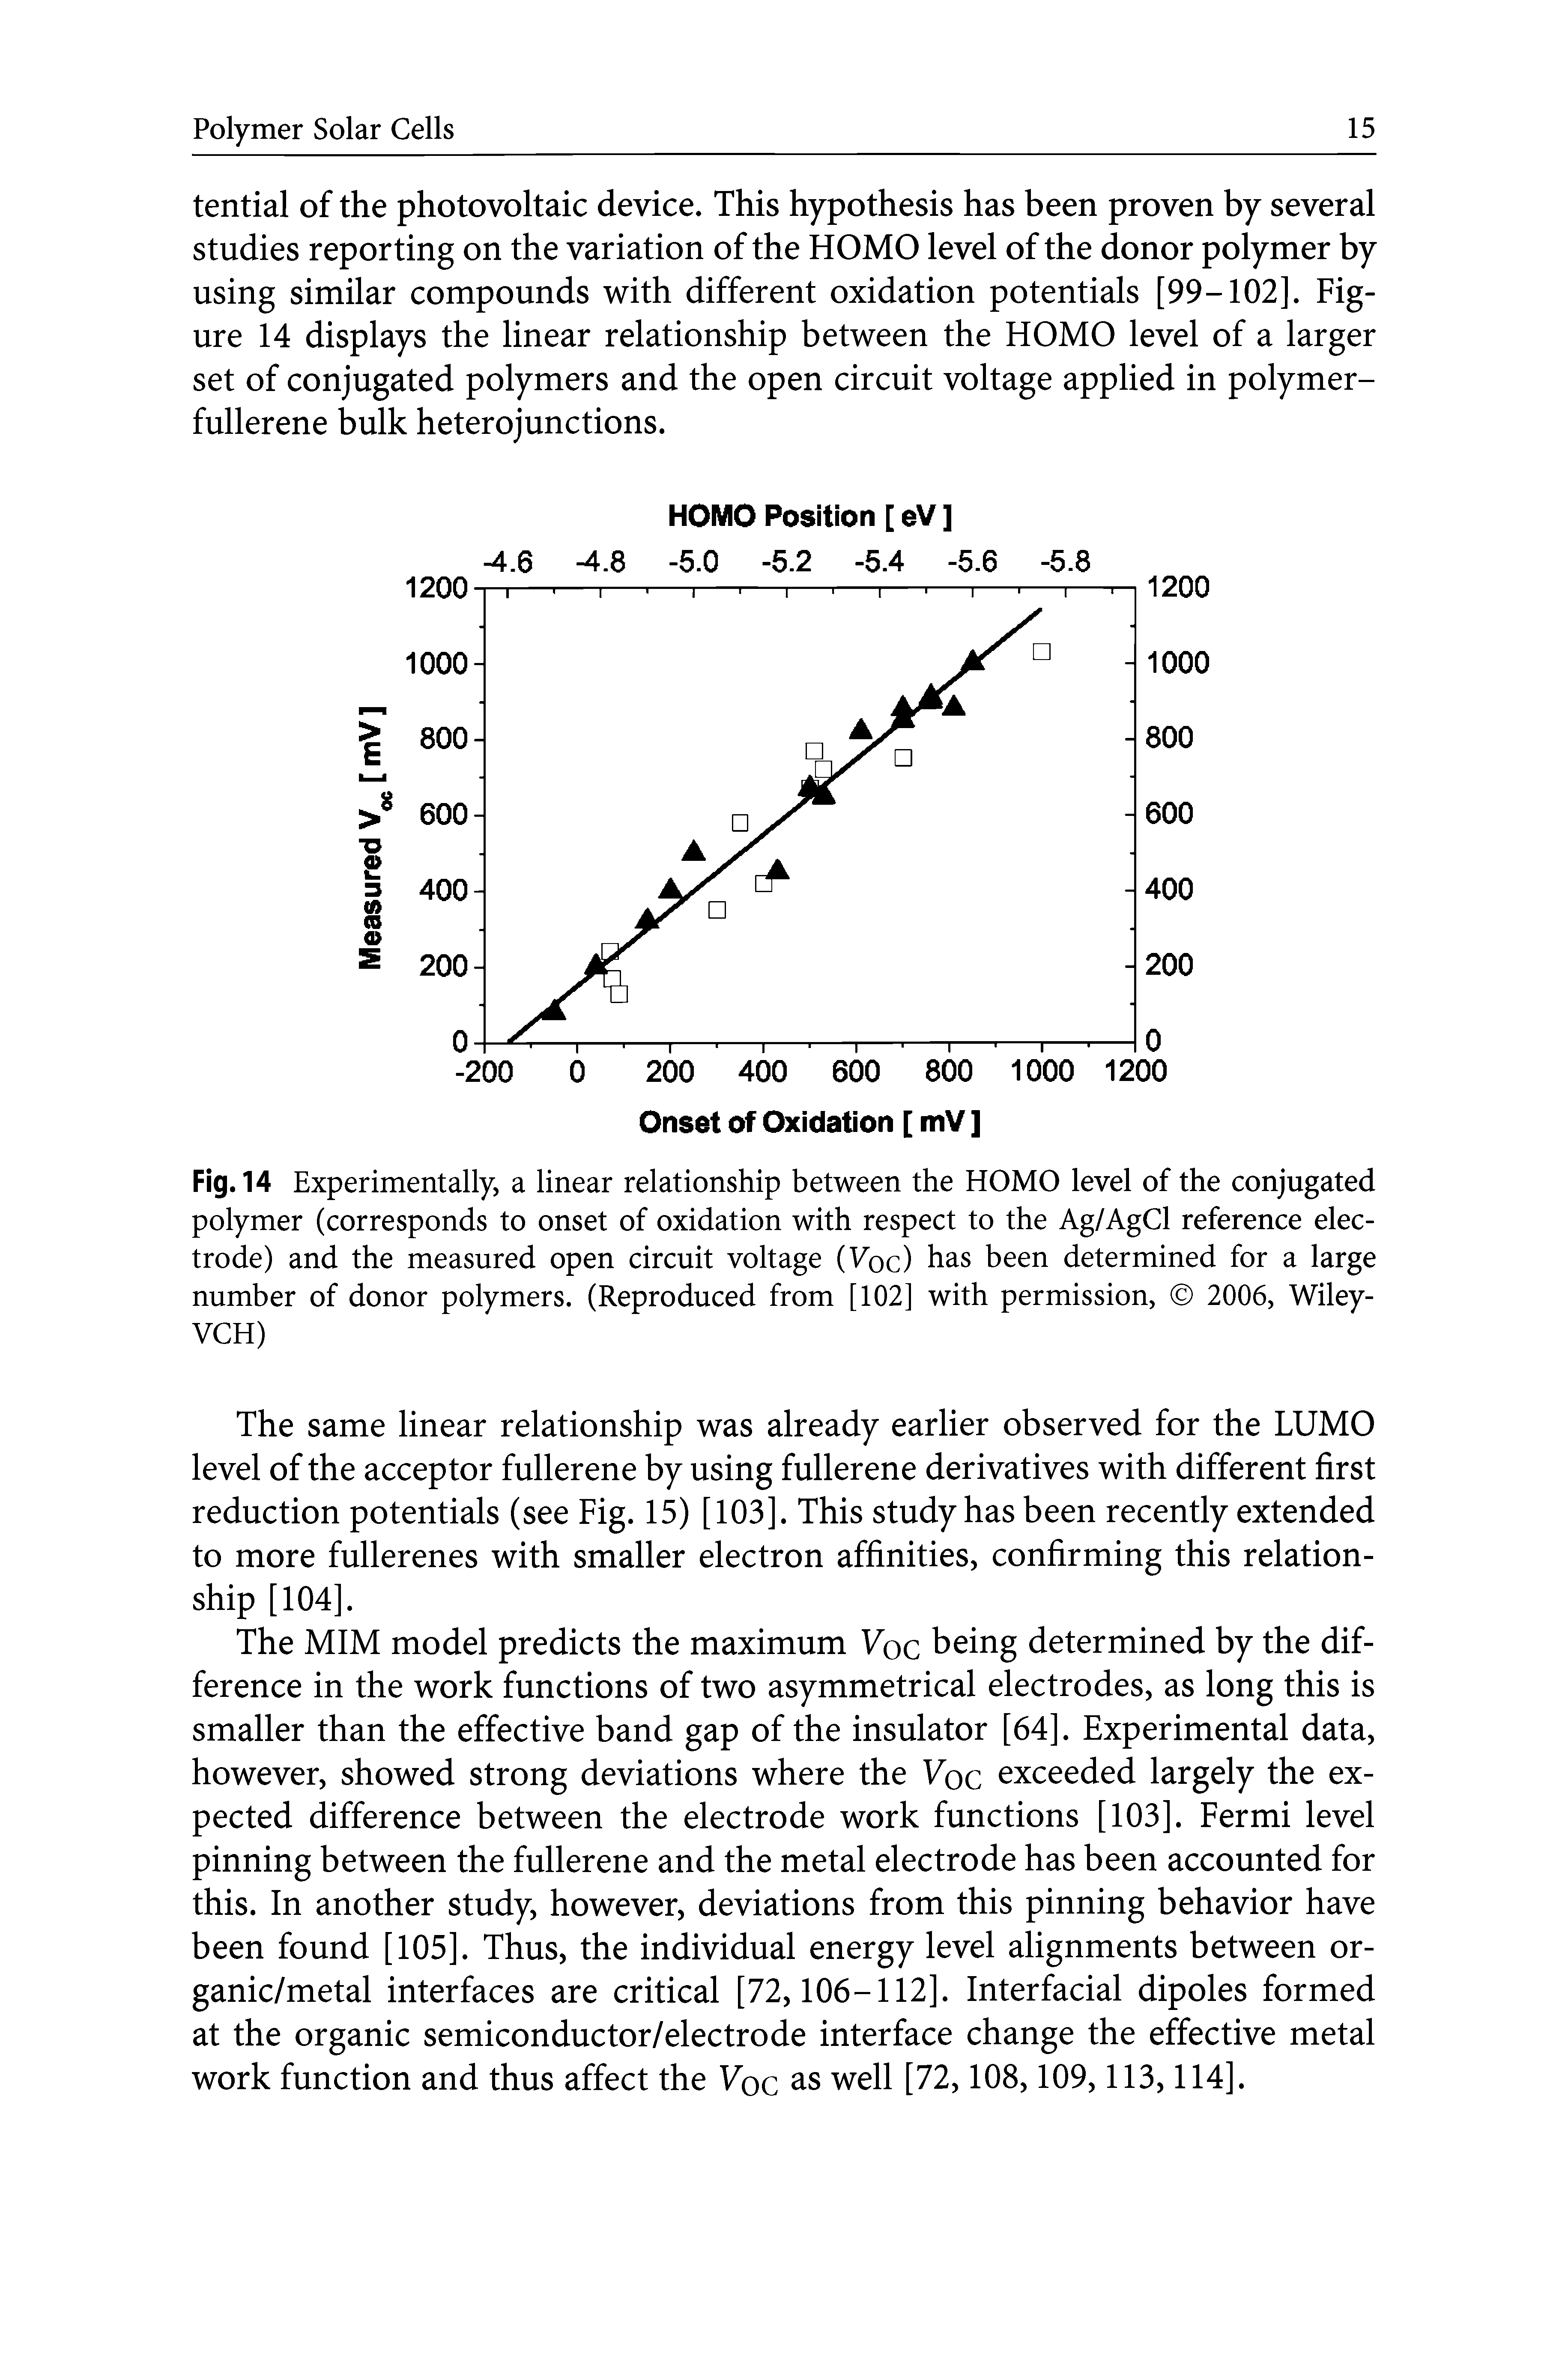 Fig. 14 Experimentally, a linear relationship between the HOMO level of the conjugated polymer (corresponds to onset of oxidation with respect to the Ag/AgCl reference electrode) and the measured open circuit voltage ( oc) has been determined for a large number of donor polymers. (Reproduced from [102] with permission, 2006, Wiley-VCH)...